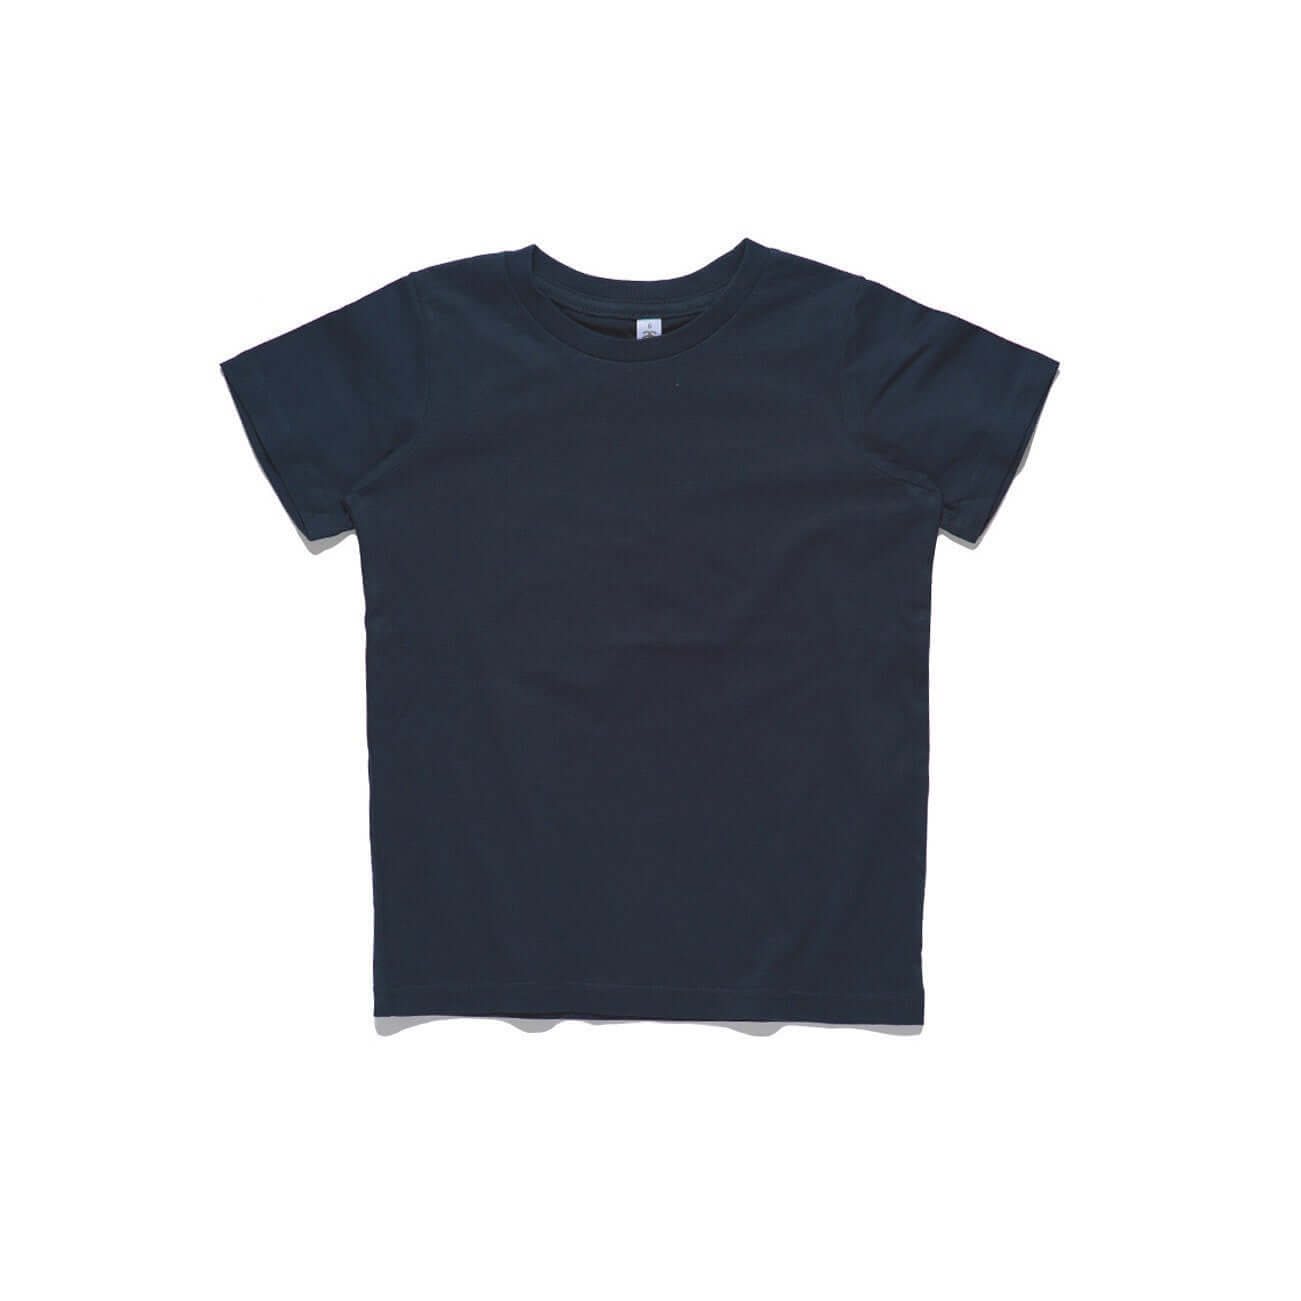 AS Colour Basic Kids Cotton Crew Neck Tee Shirt White, Navy, Coal and Grey Marl - Frankie's Story - 2